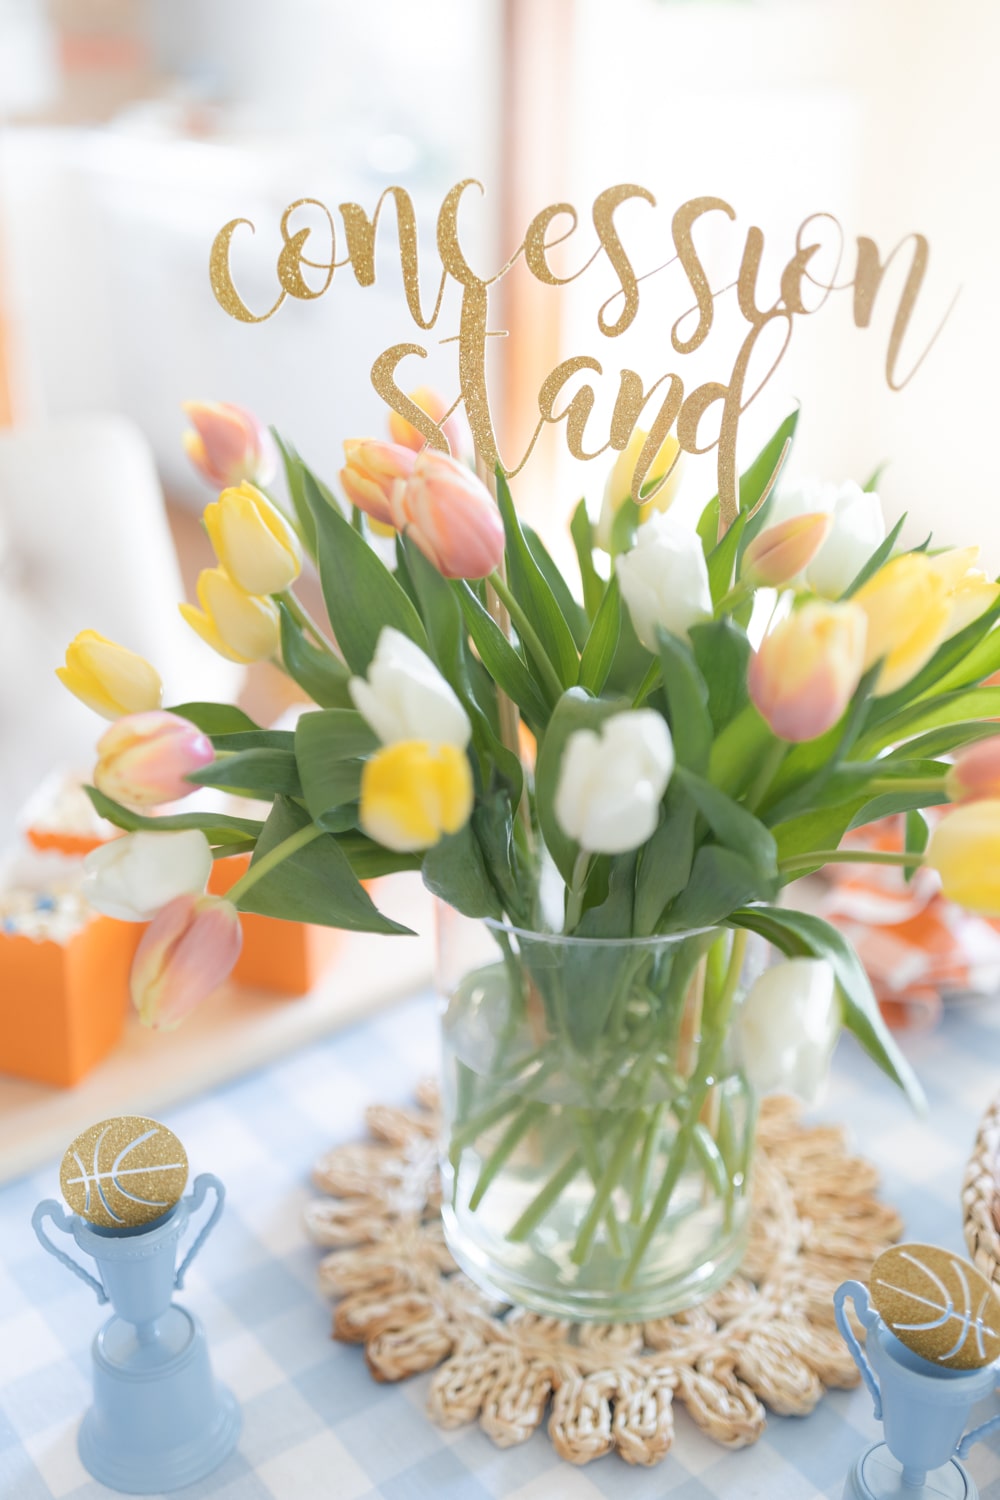 DIY concession stand centerpiece created by blogger Stephanie Ziajka on Diary of a Debutante